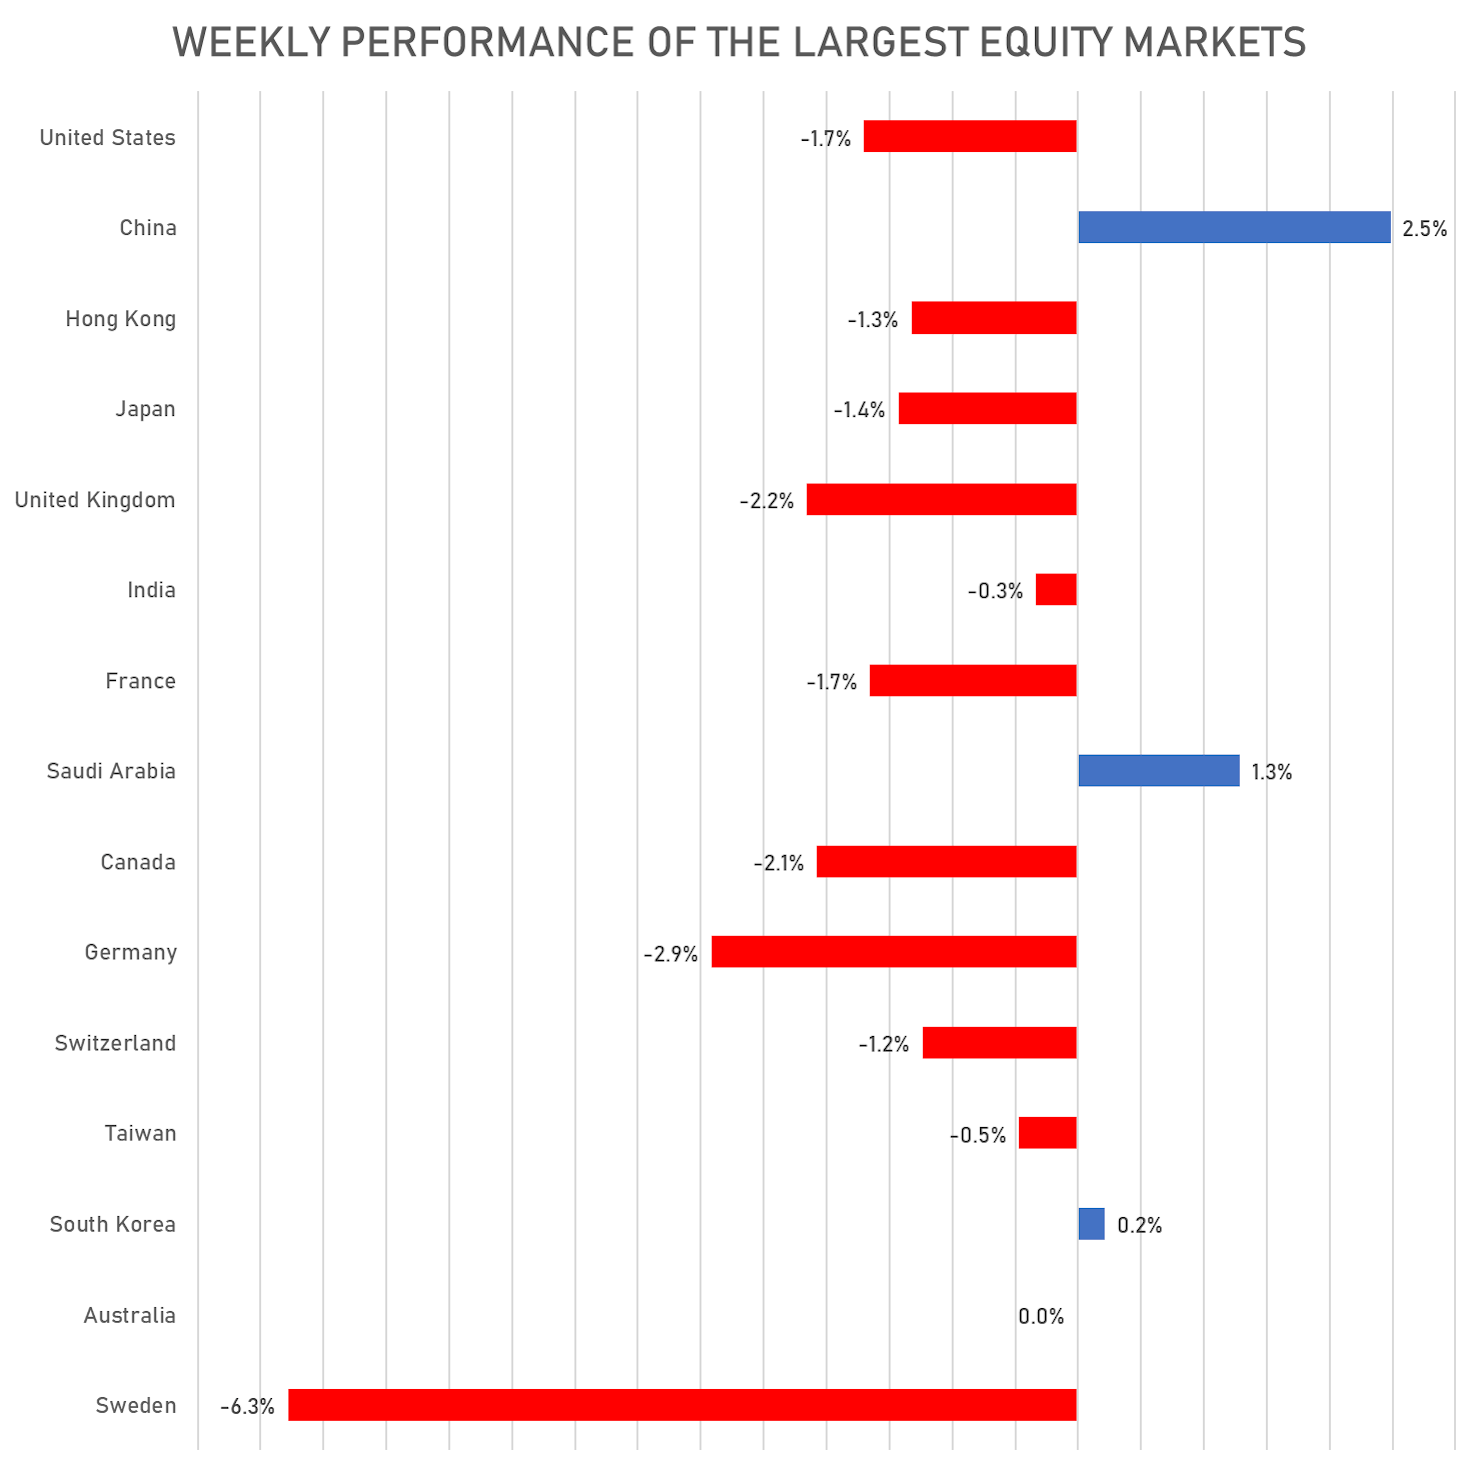 Weekly Performance Of the Top Global Equity Markets | Sources: phipost.com, FactSet data